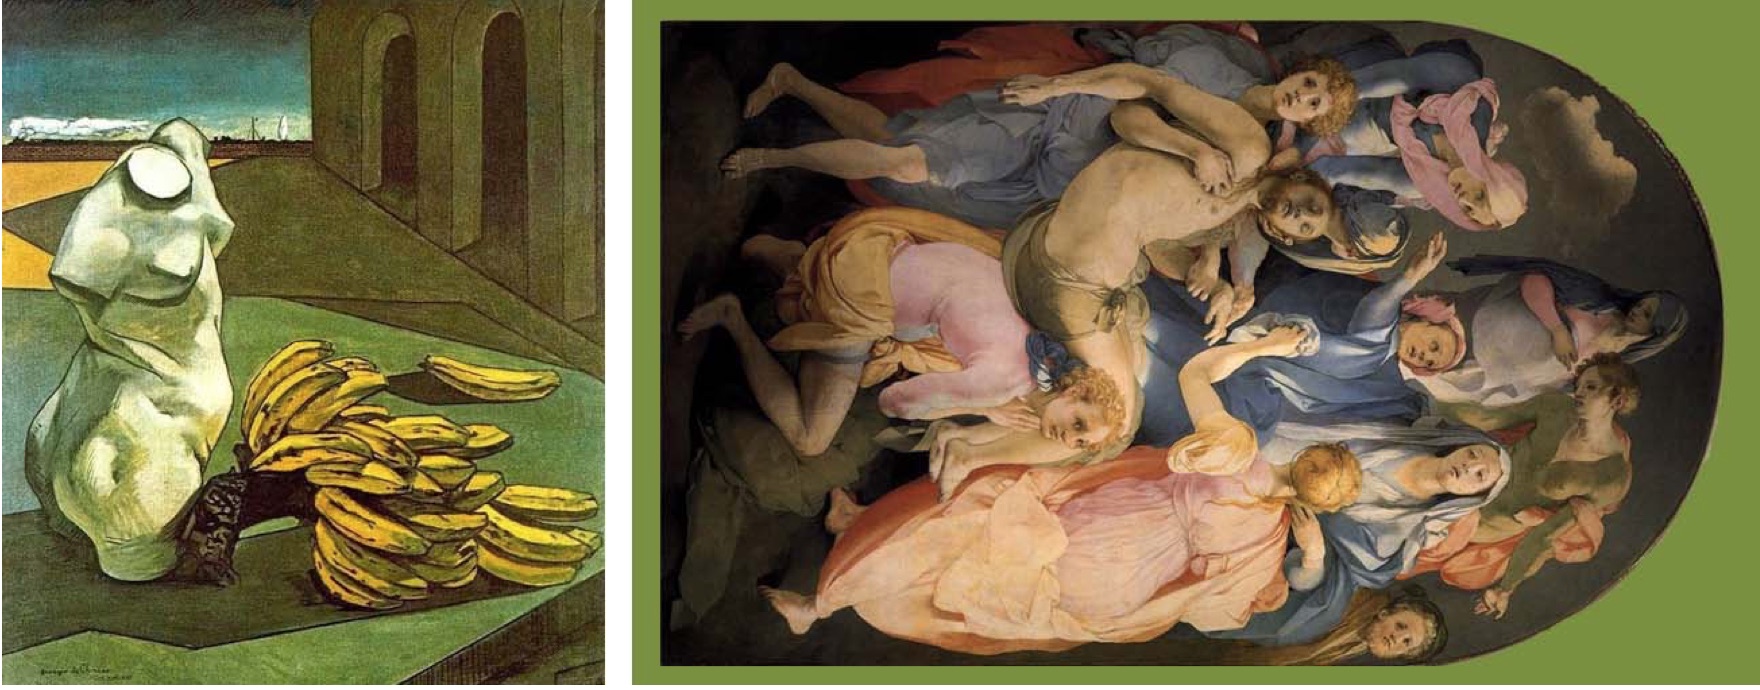 Photo that expresses a creative language: on the left painted with a human bust and a bunch of bananas, on the right a sacred painting on the death of Jesus